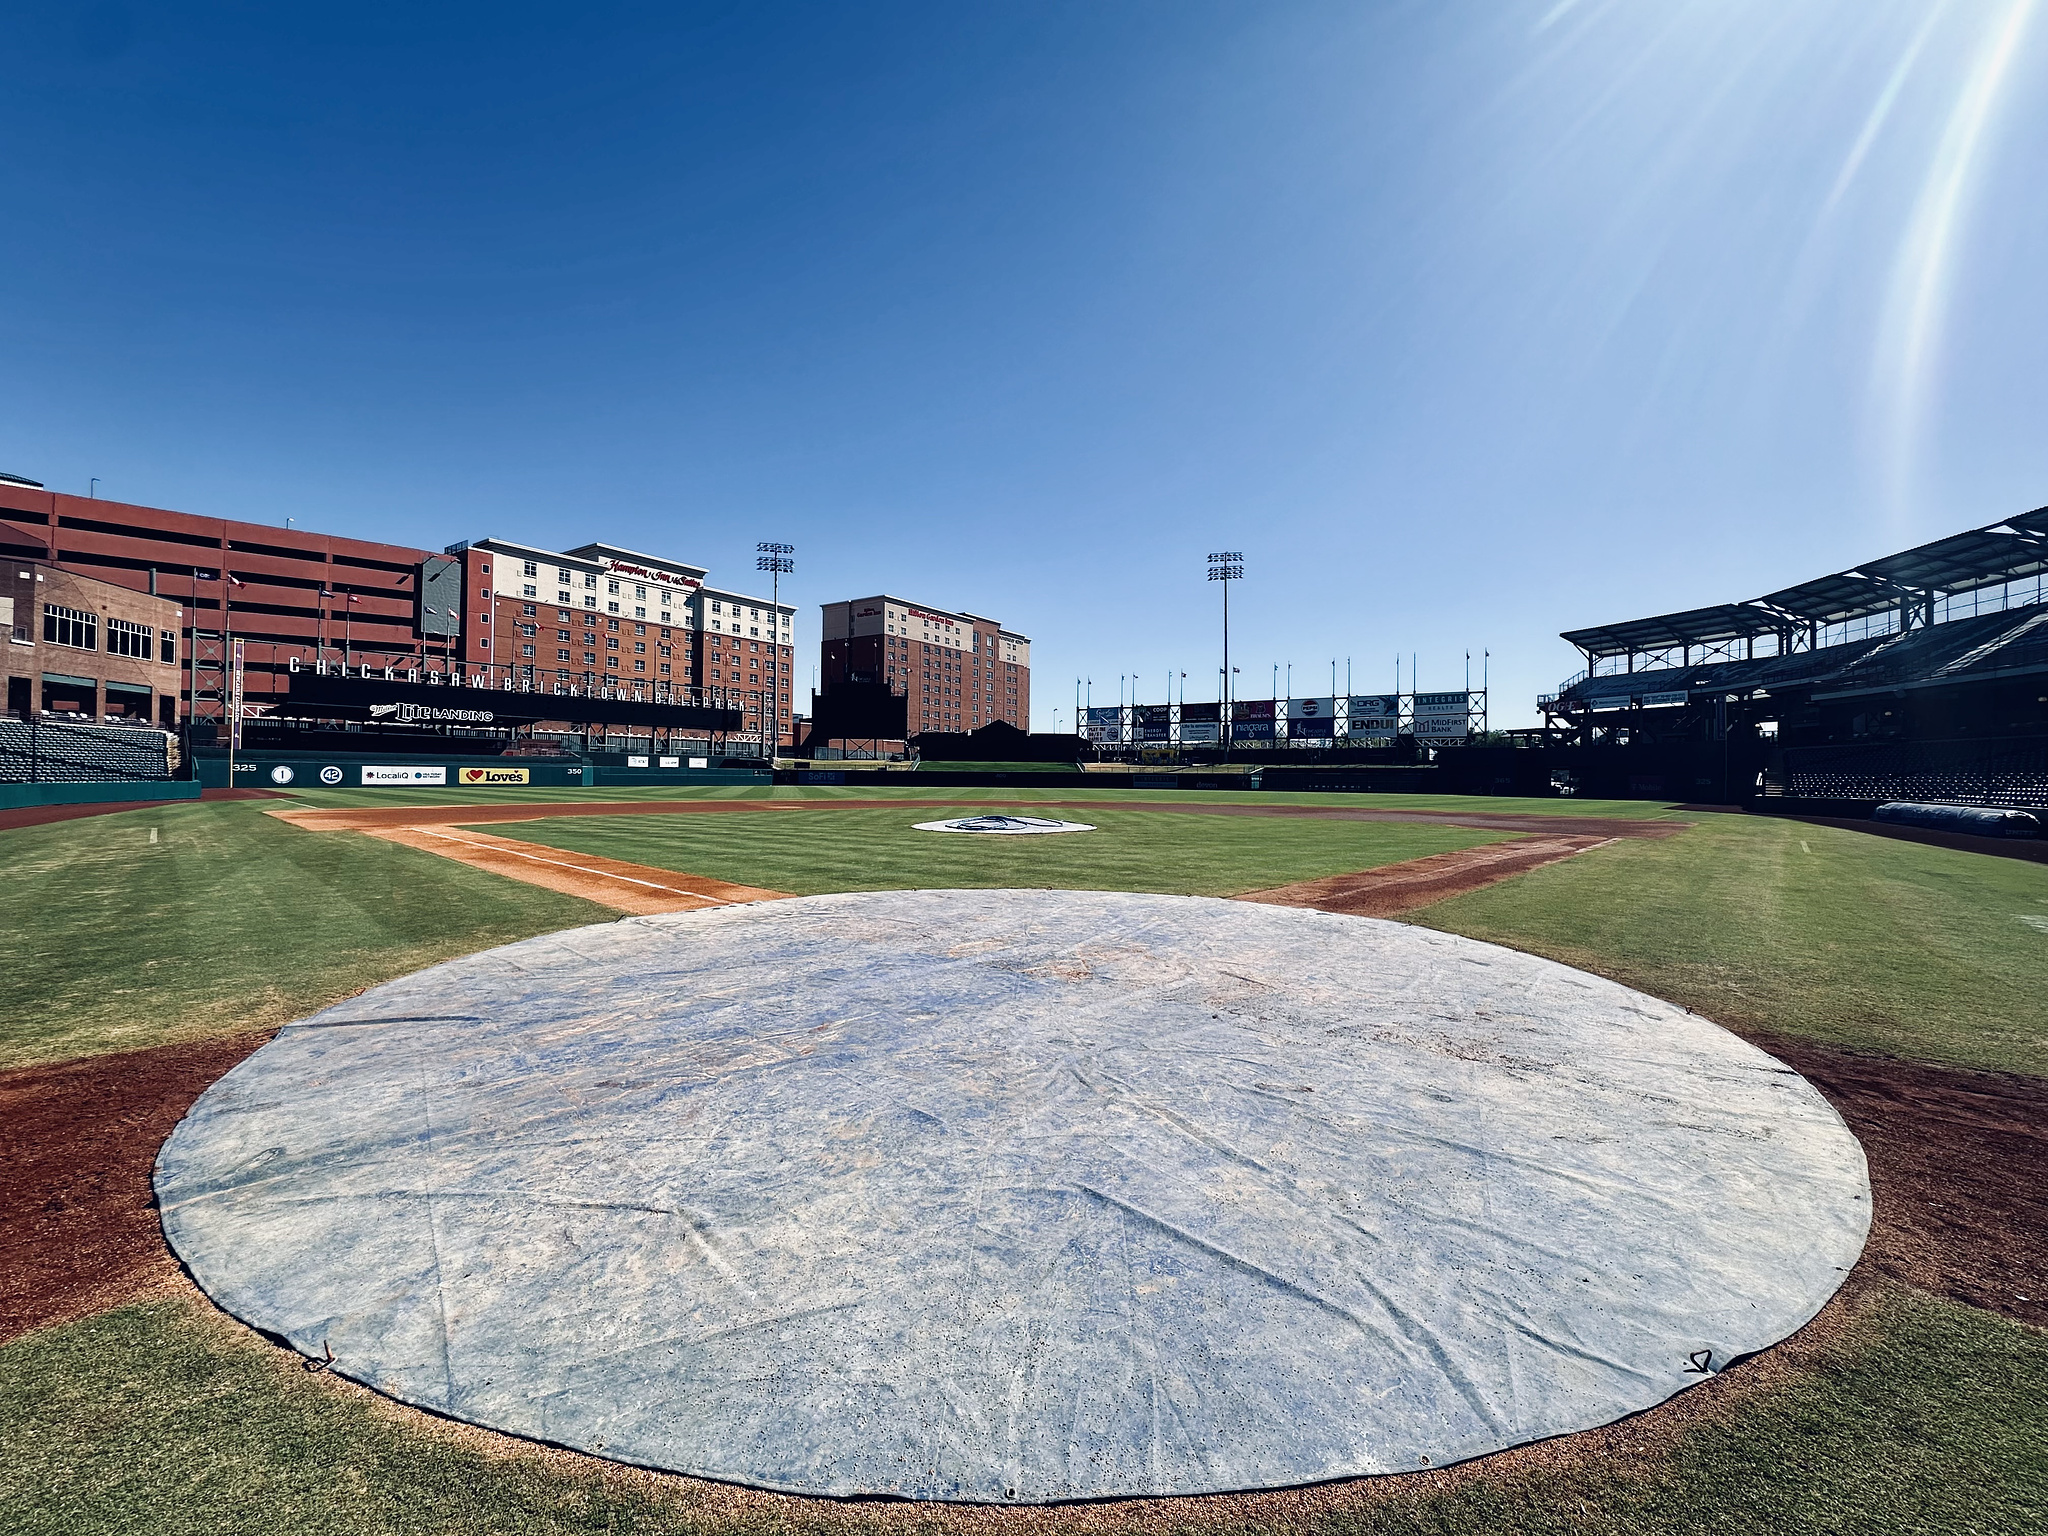 View of The Bricktown Ballpark from home plate.